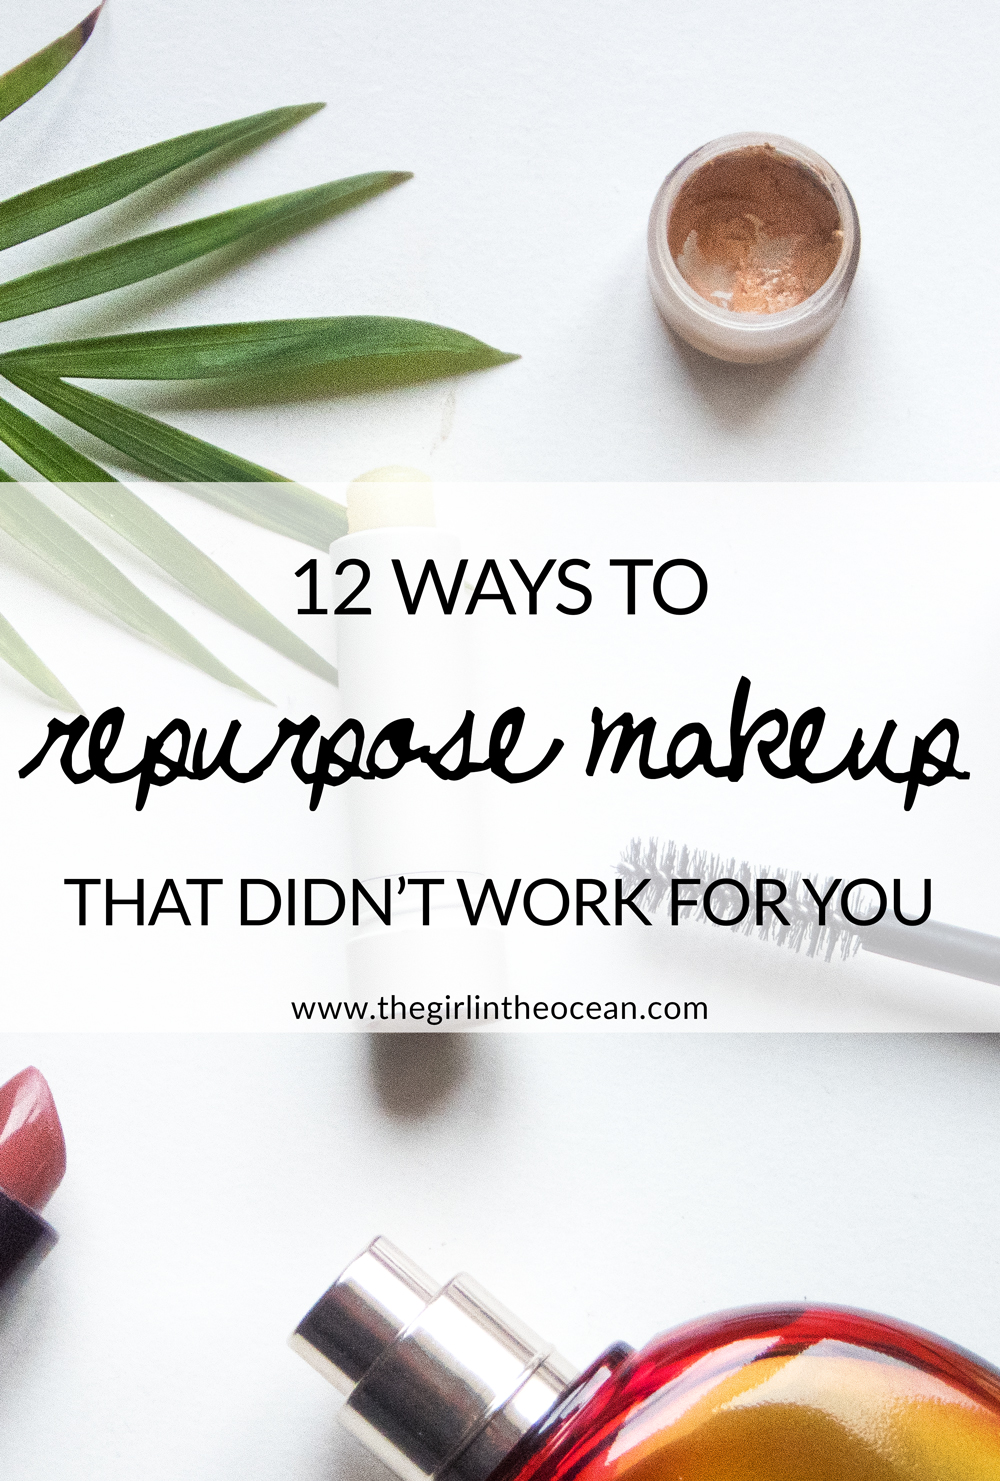 12 Ways to Repurpose Makeup that didn't Work for You